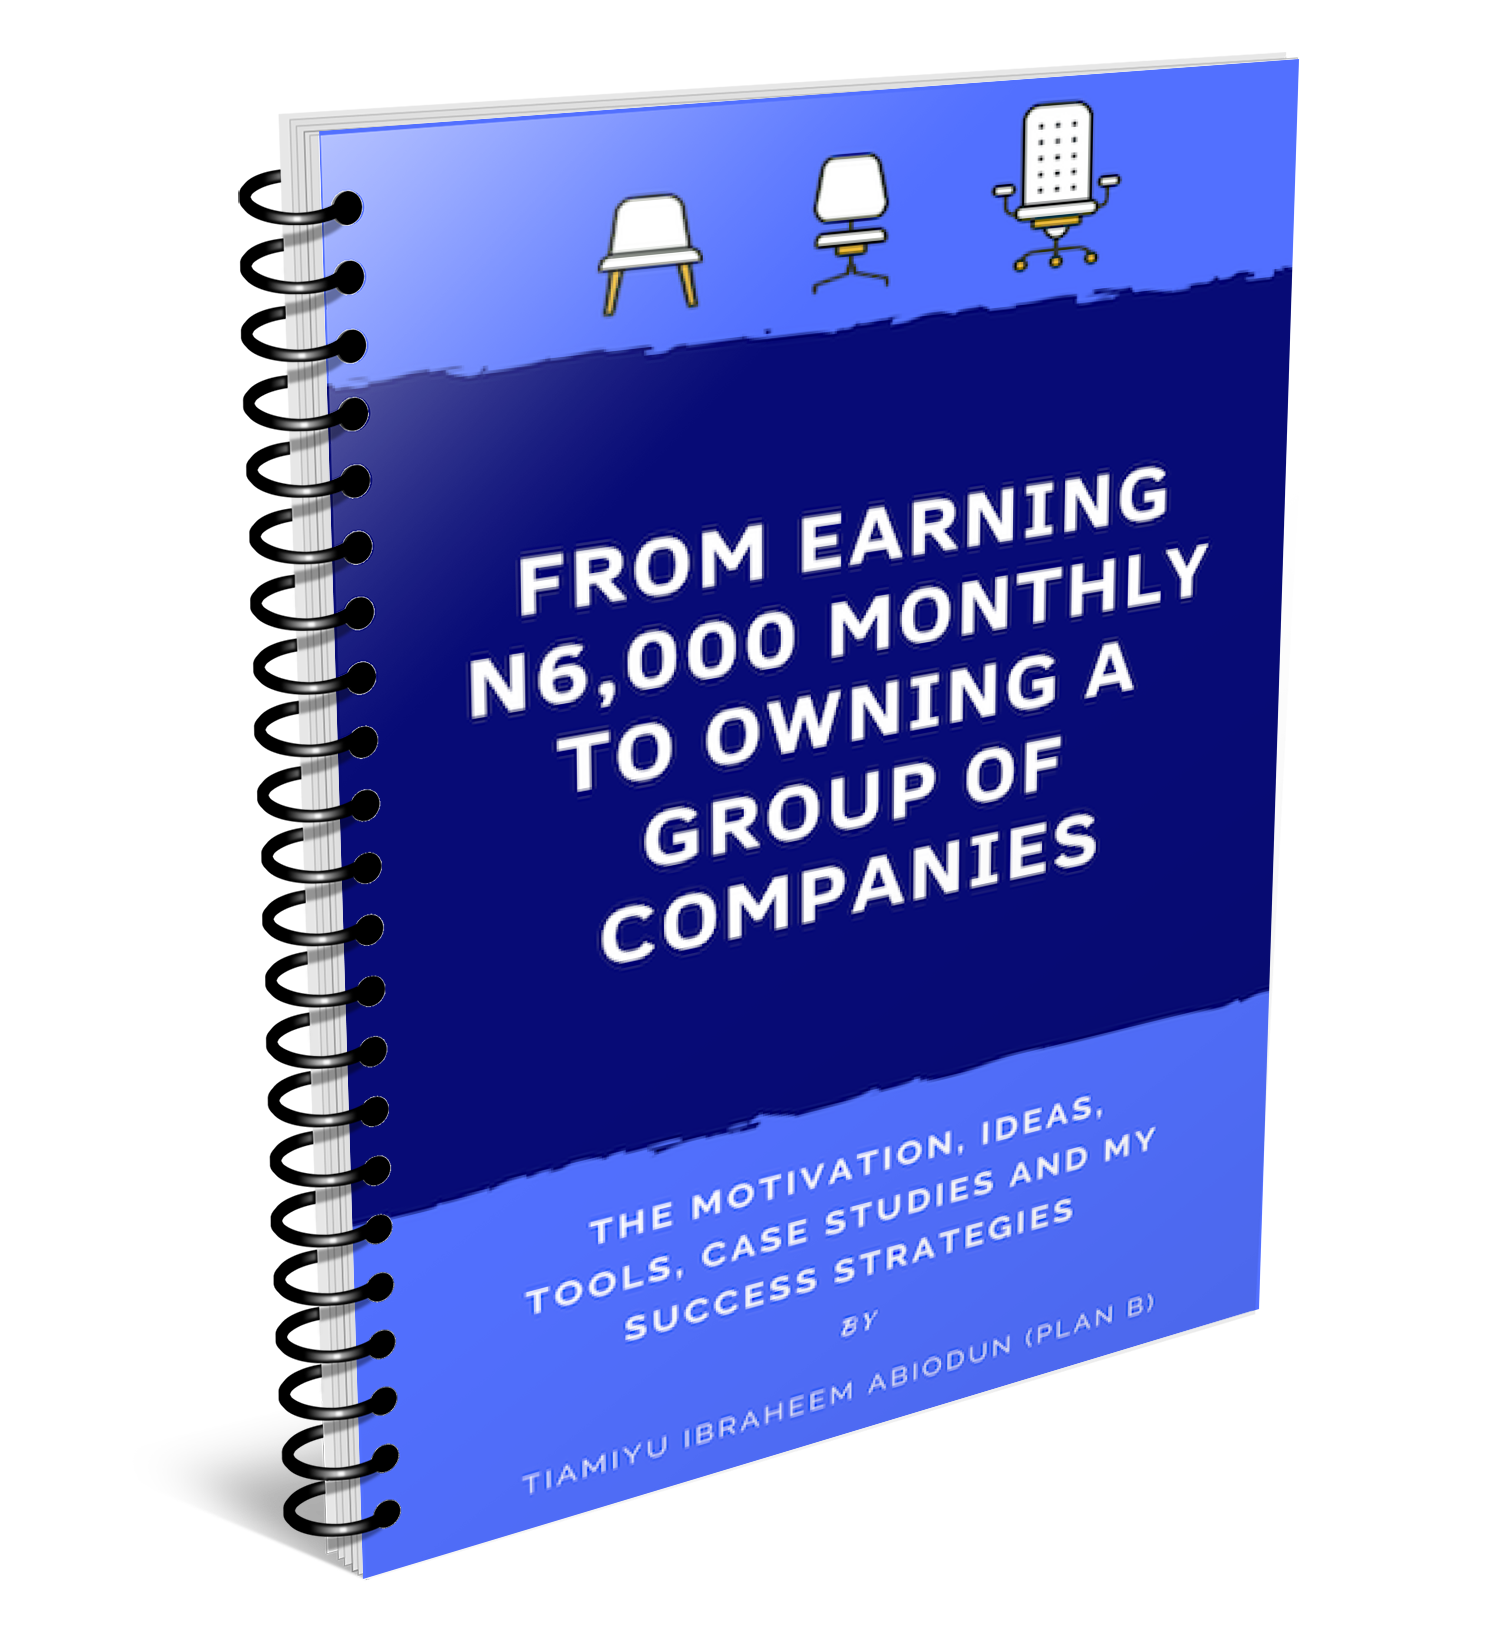 from earning N6,000 monthly to owning a group of companies by Tiamiyu Ibraheem Abiodun (Plan B)